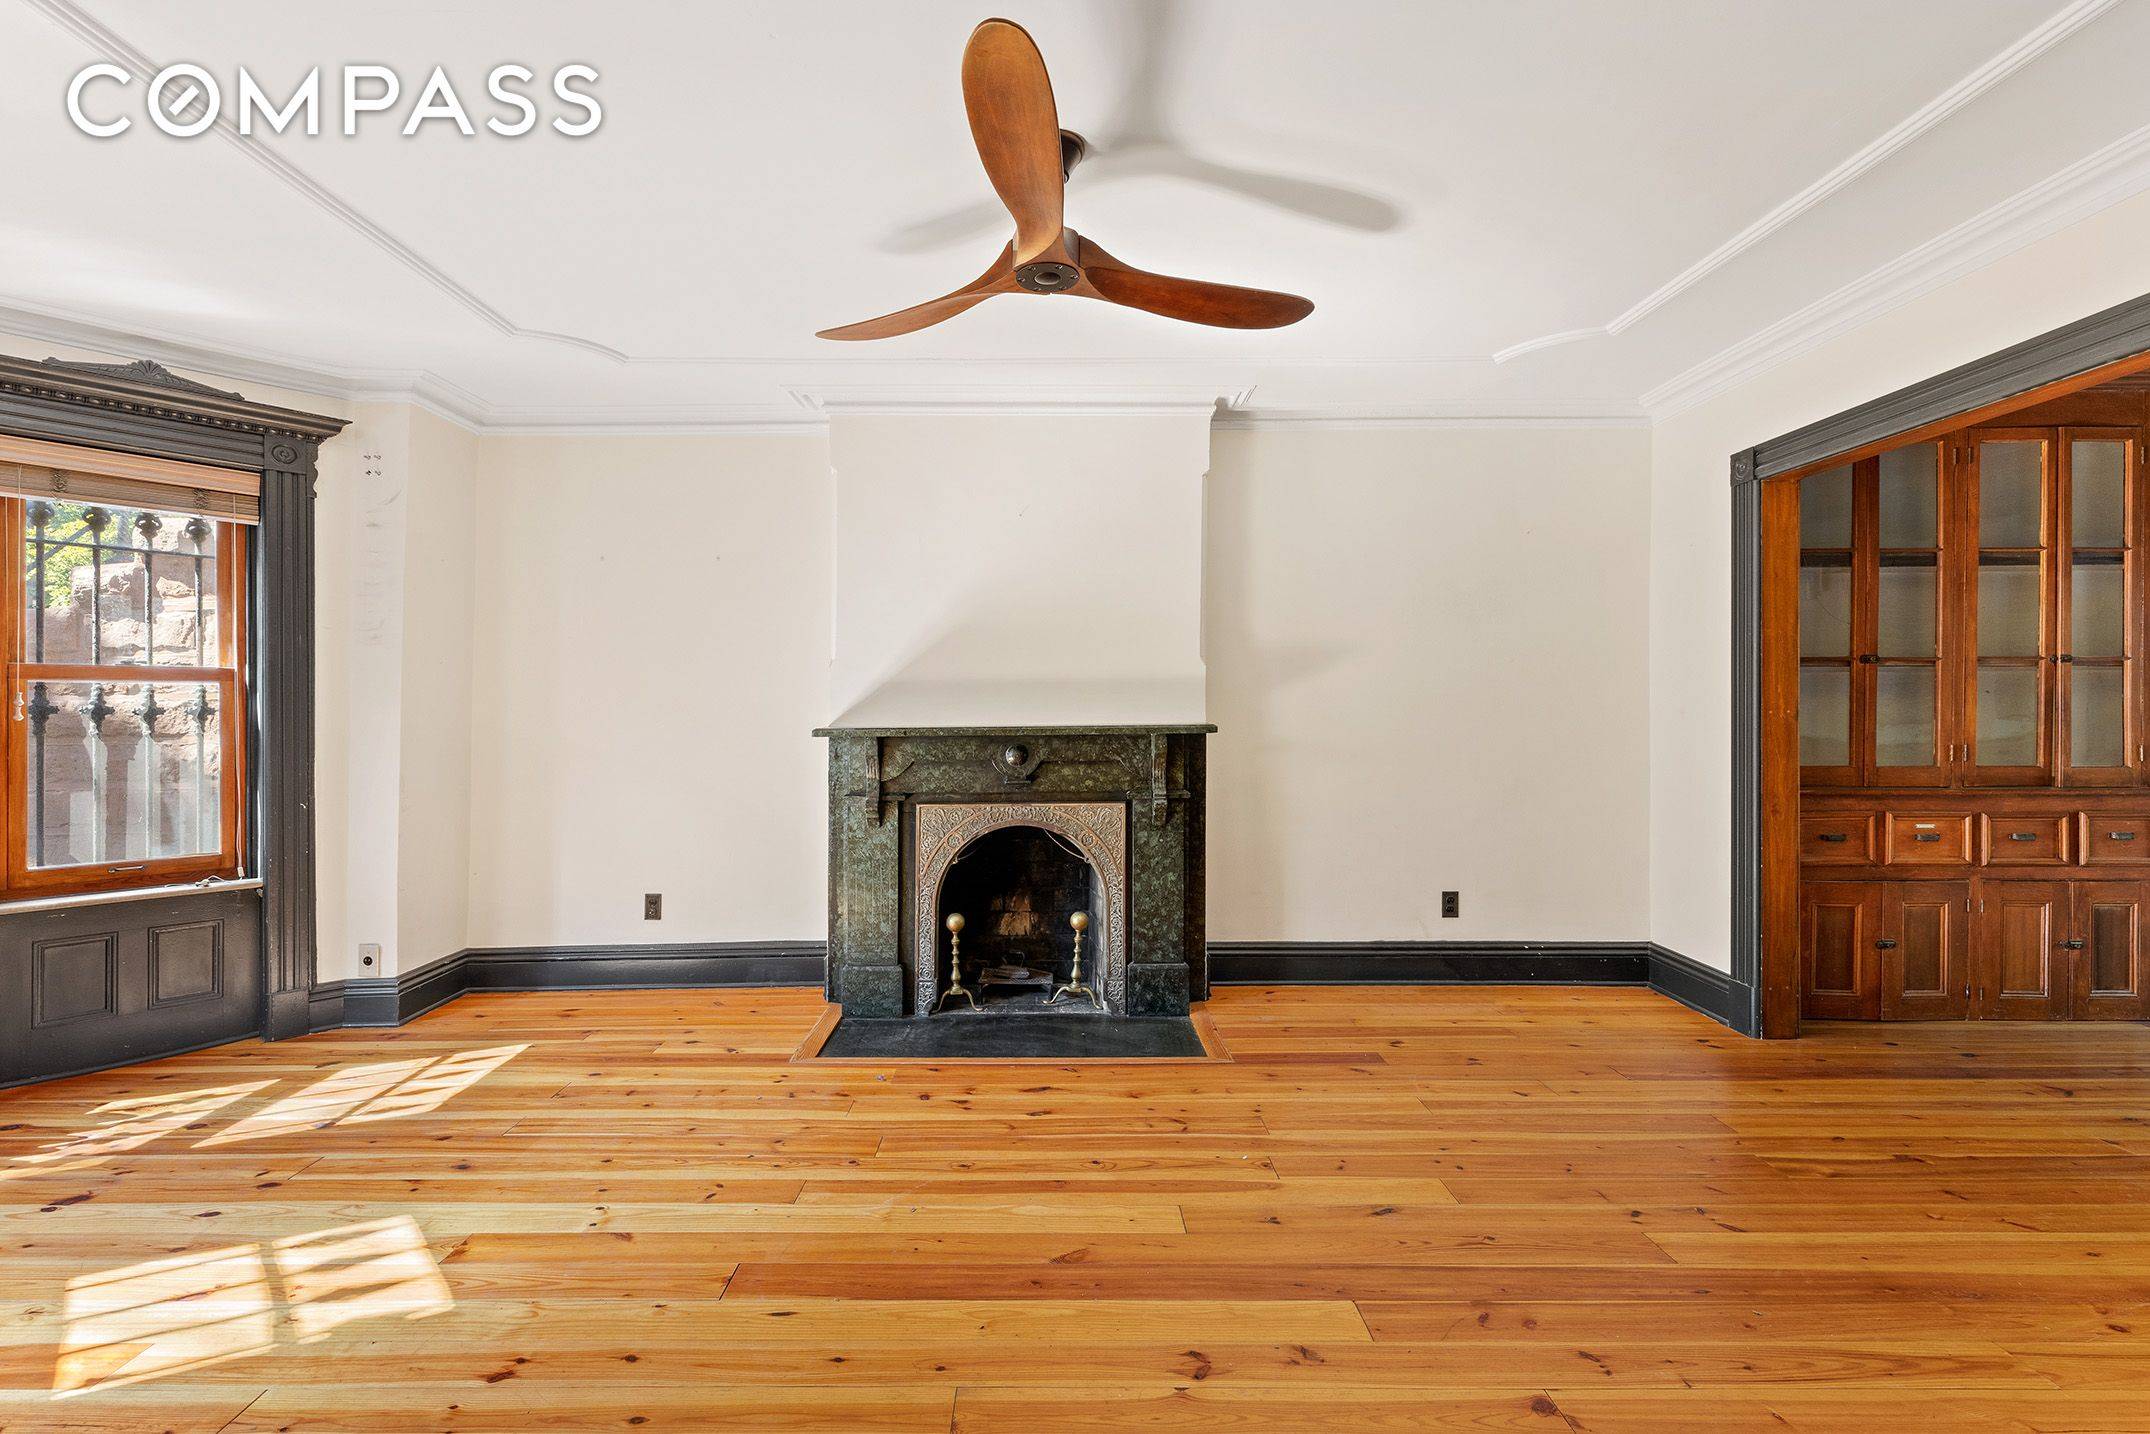 Welcome home. This lovely 2 family brownstone townhouse is nestled in the historic neighborhood of Sunset Park.